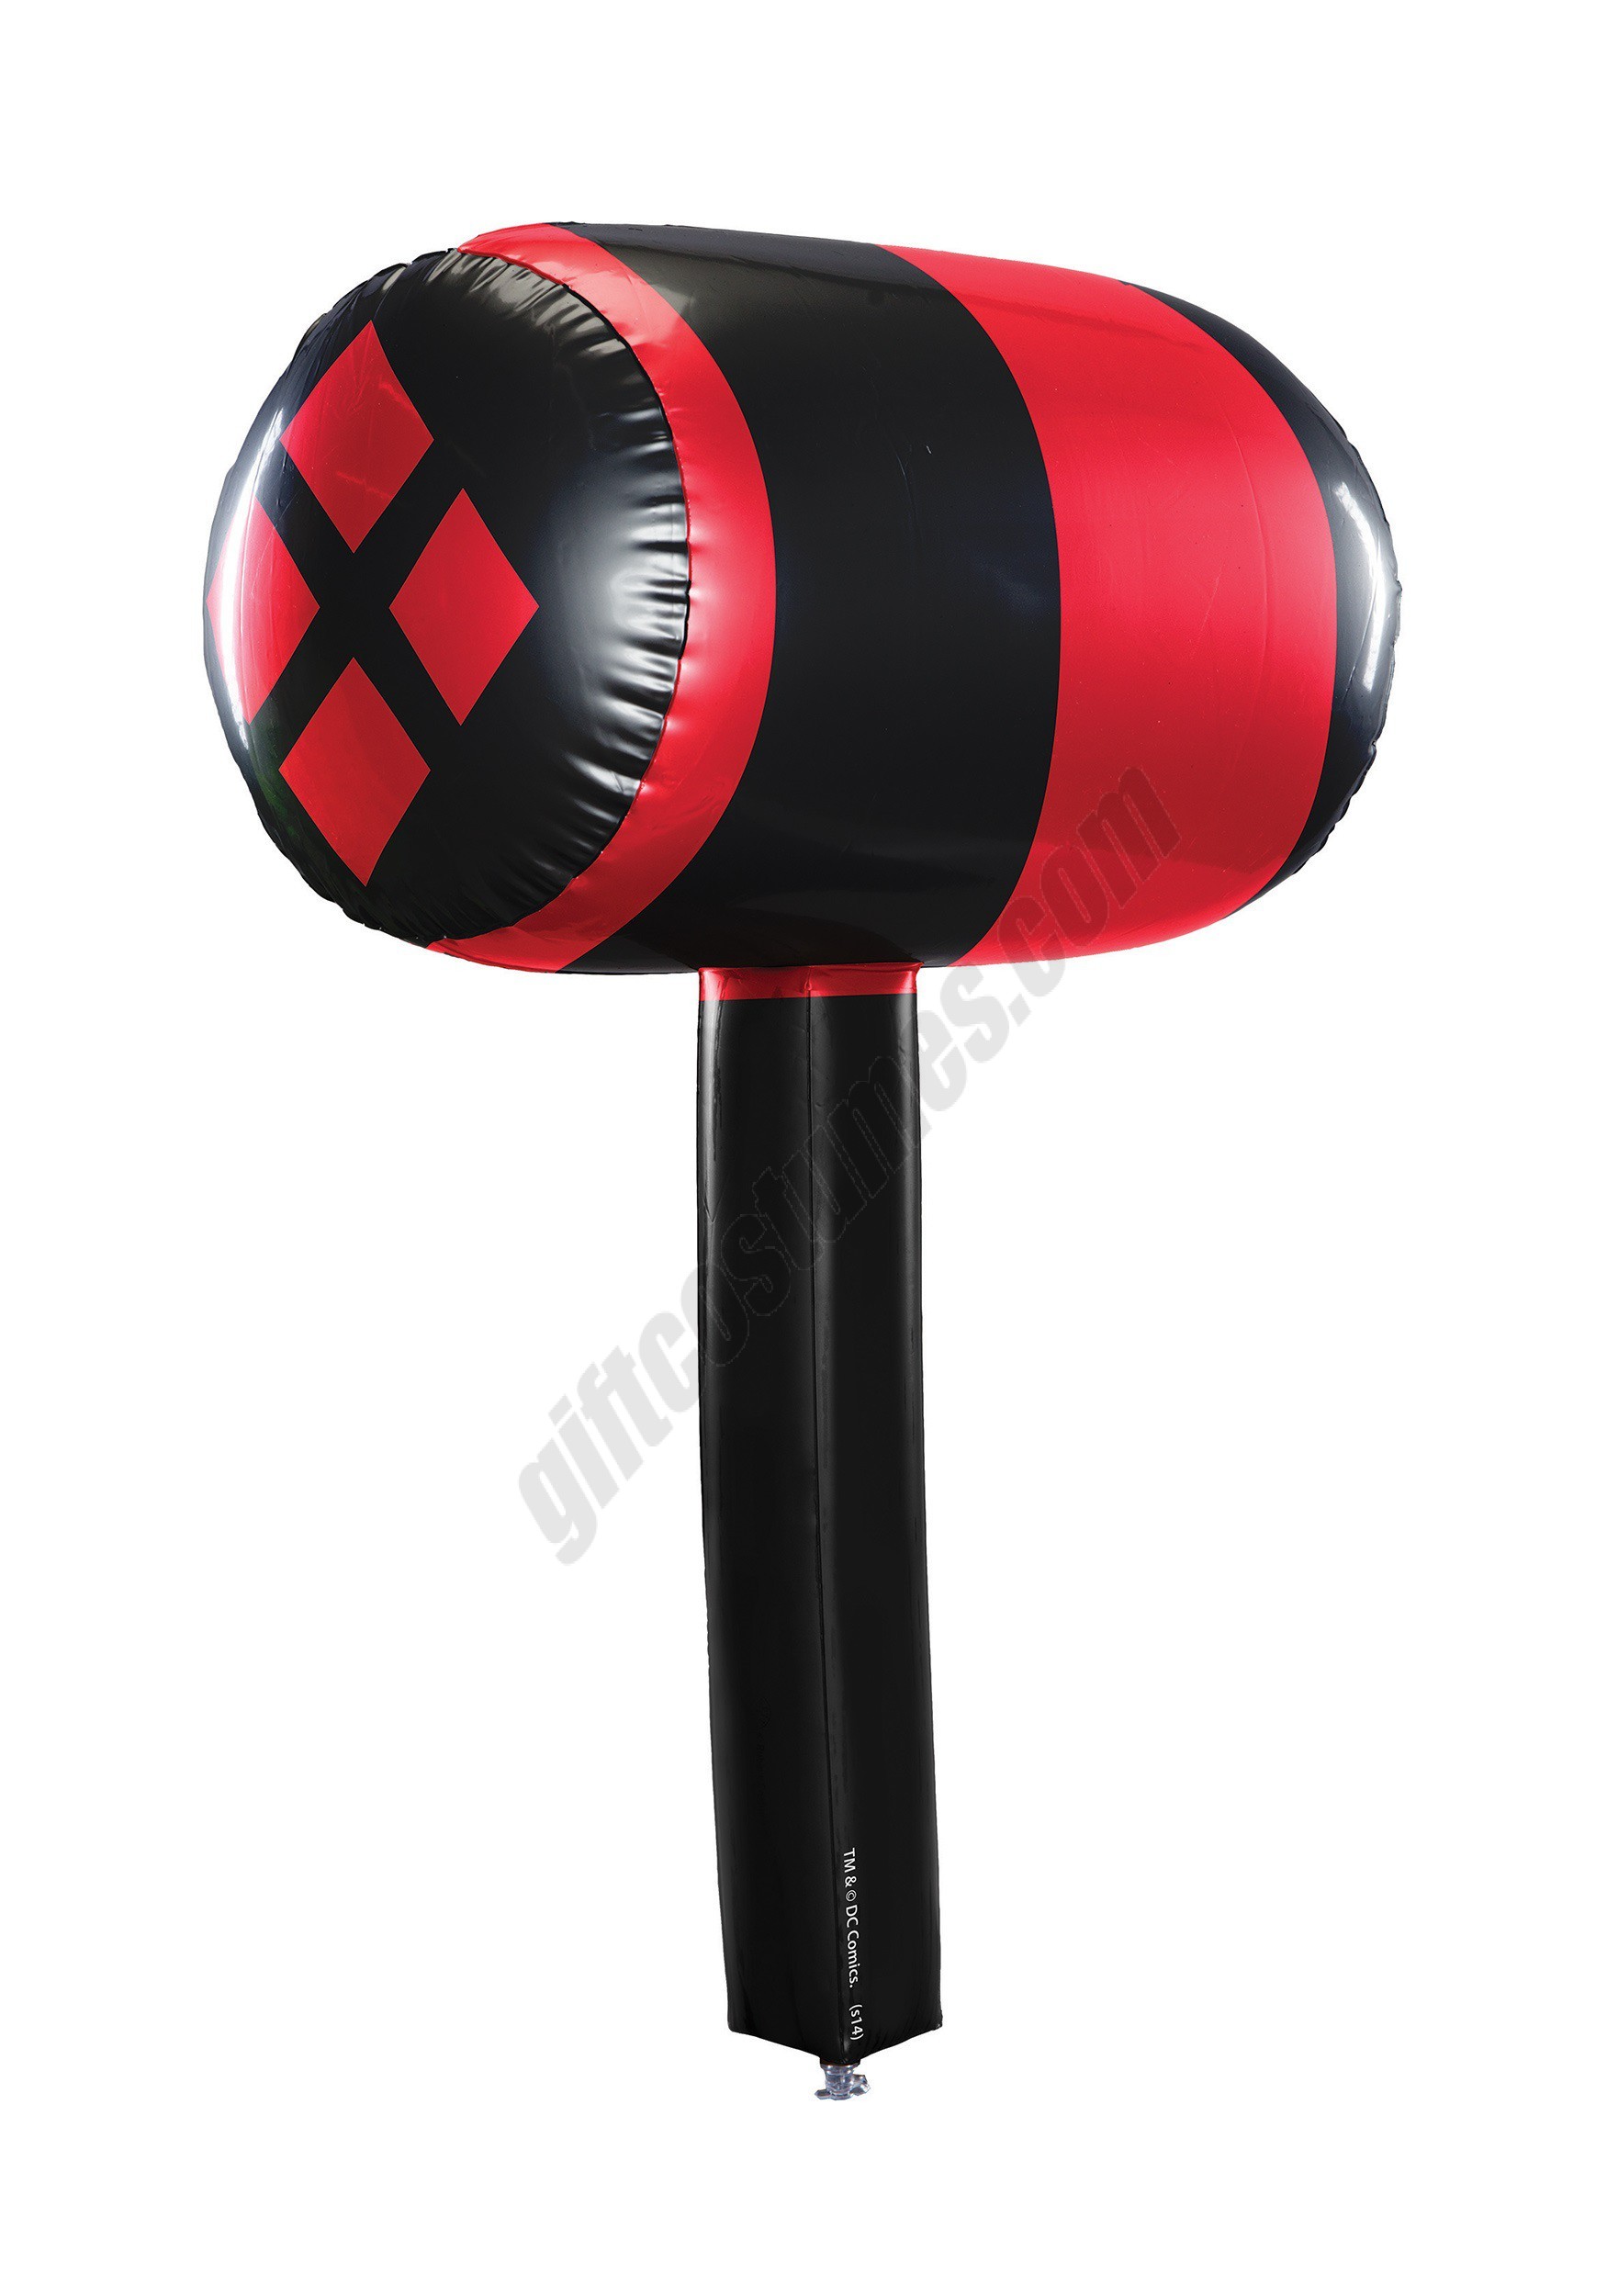 Harley Quinn Inflatable Mallet Promotions - Harley Quinn Inflatable Mallet Promotions